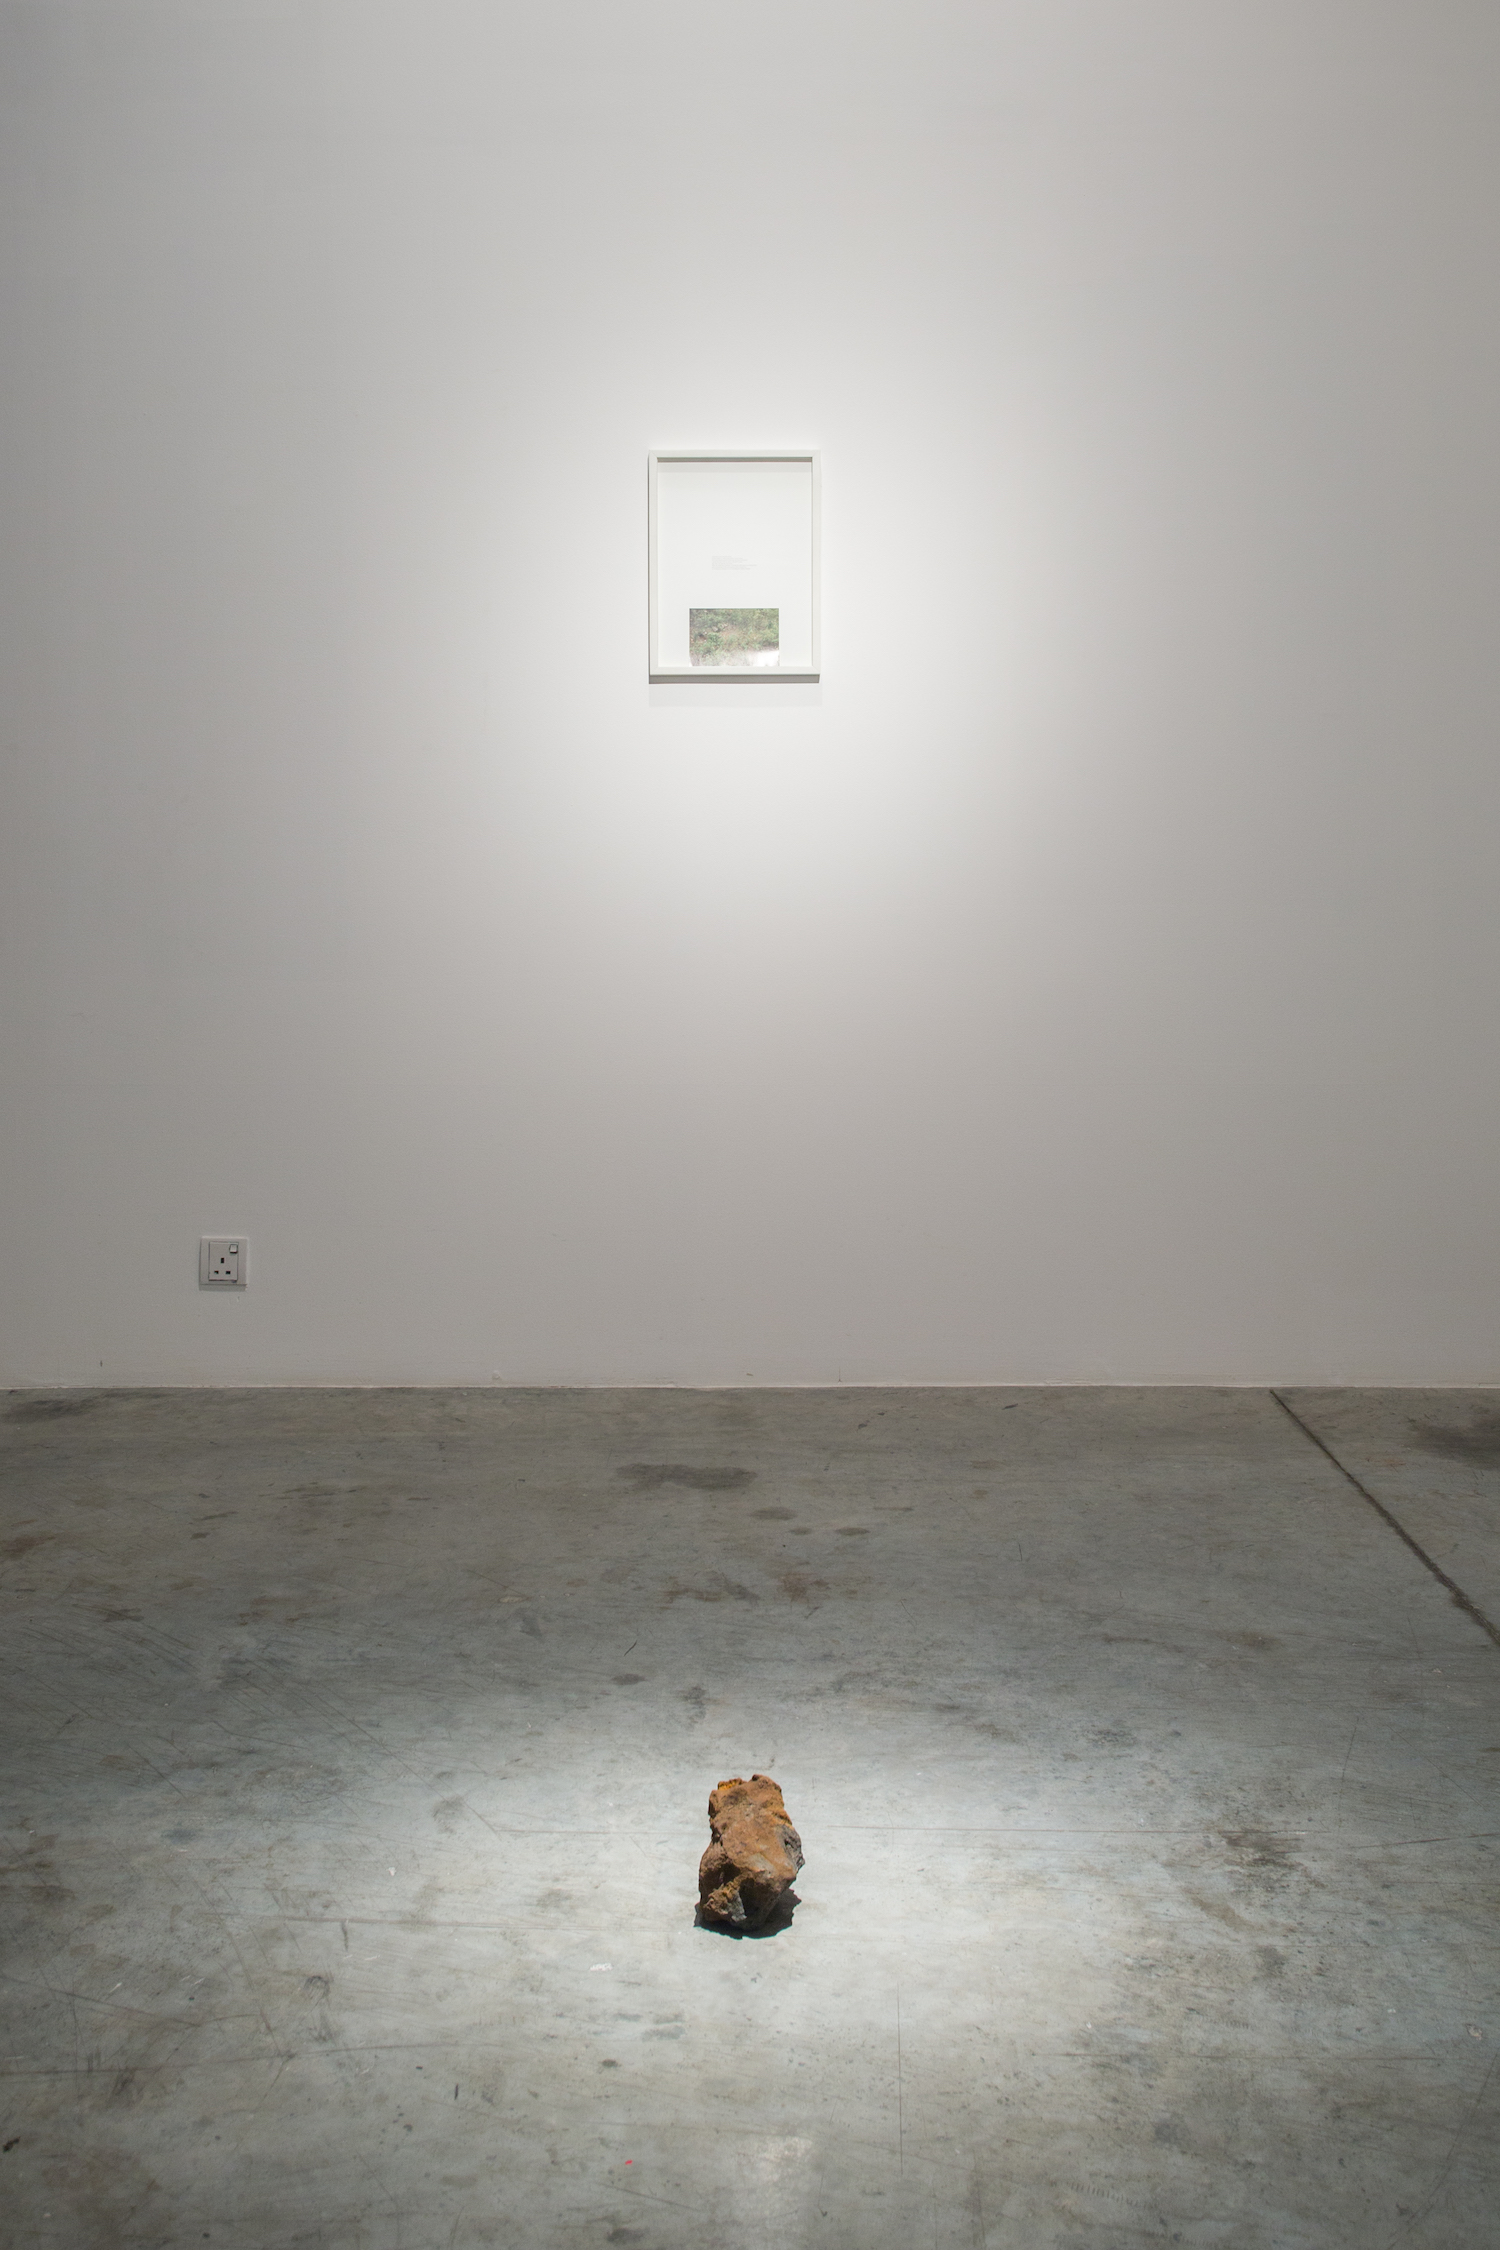  Installation view / Intangible experiences, arrangements, and manoeuvres   